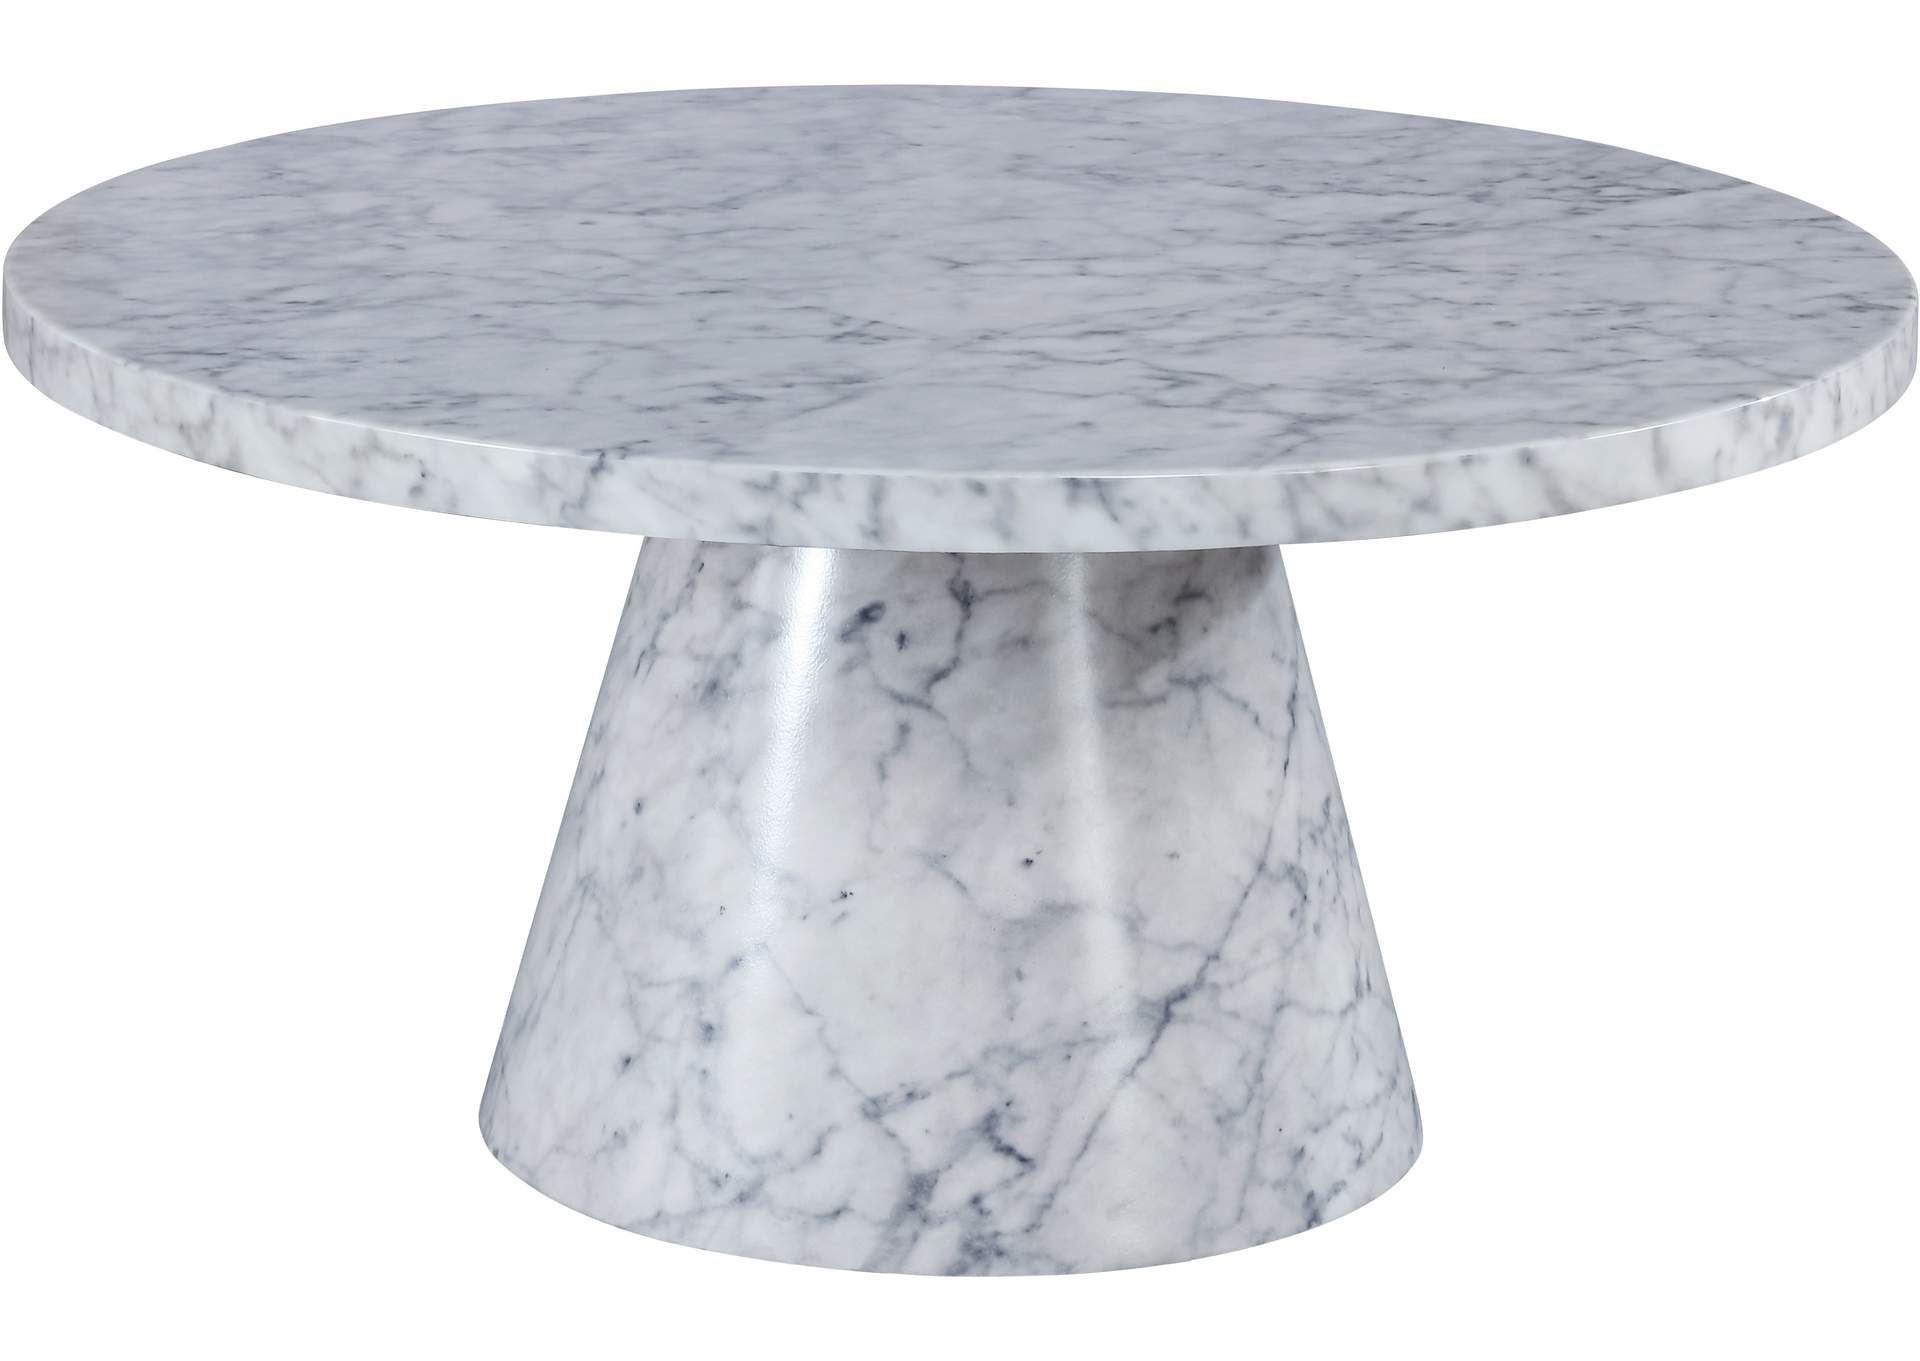 Omni White Faux Marble Coffee Table Best Buy Furniture And Mattress With White Faux Marble Coffee Tables (View 6 of 15)